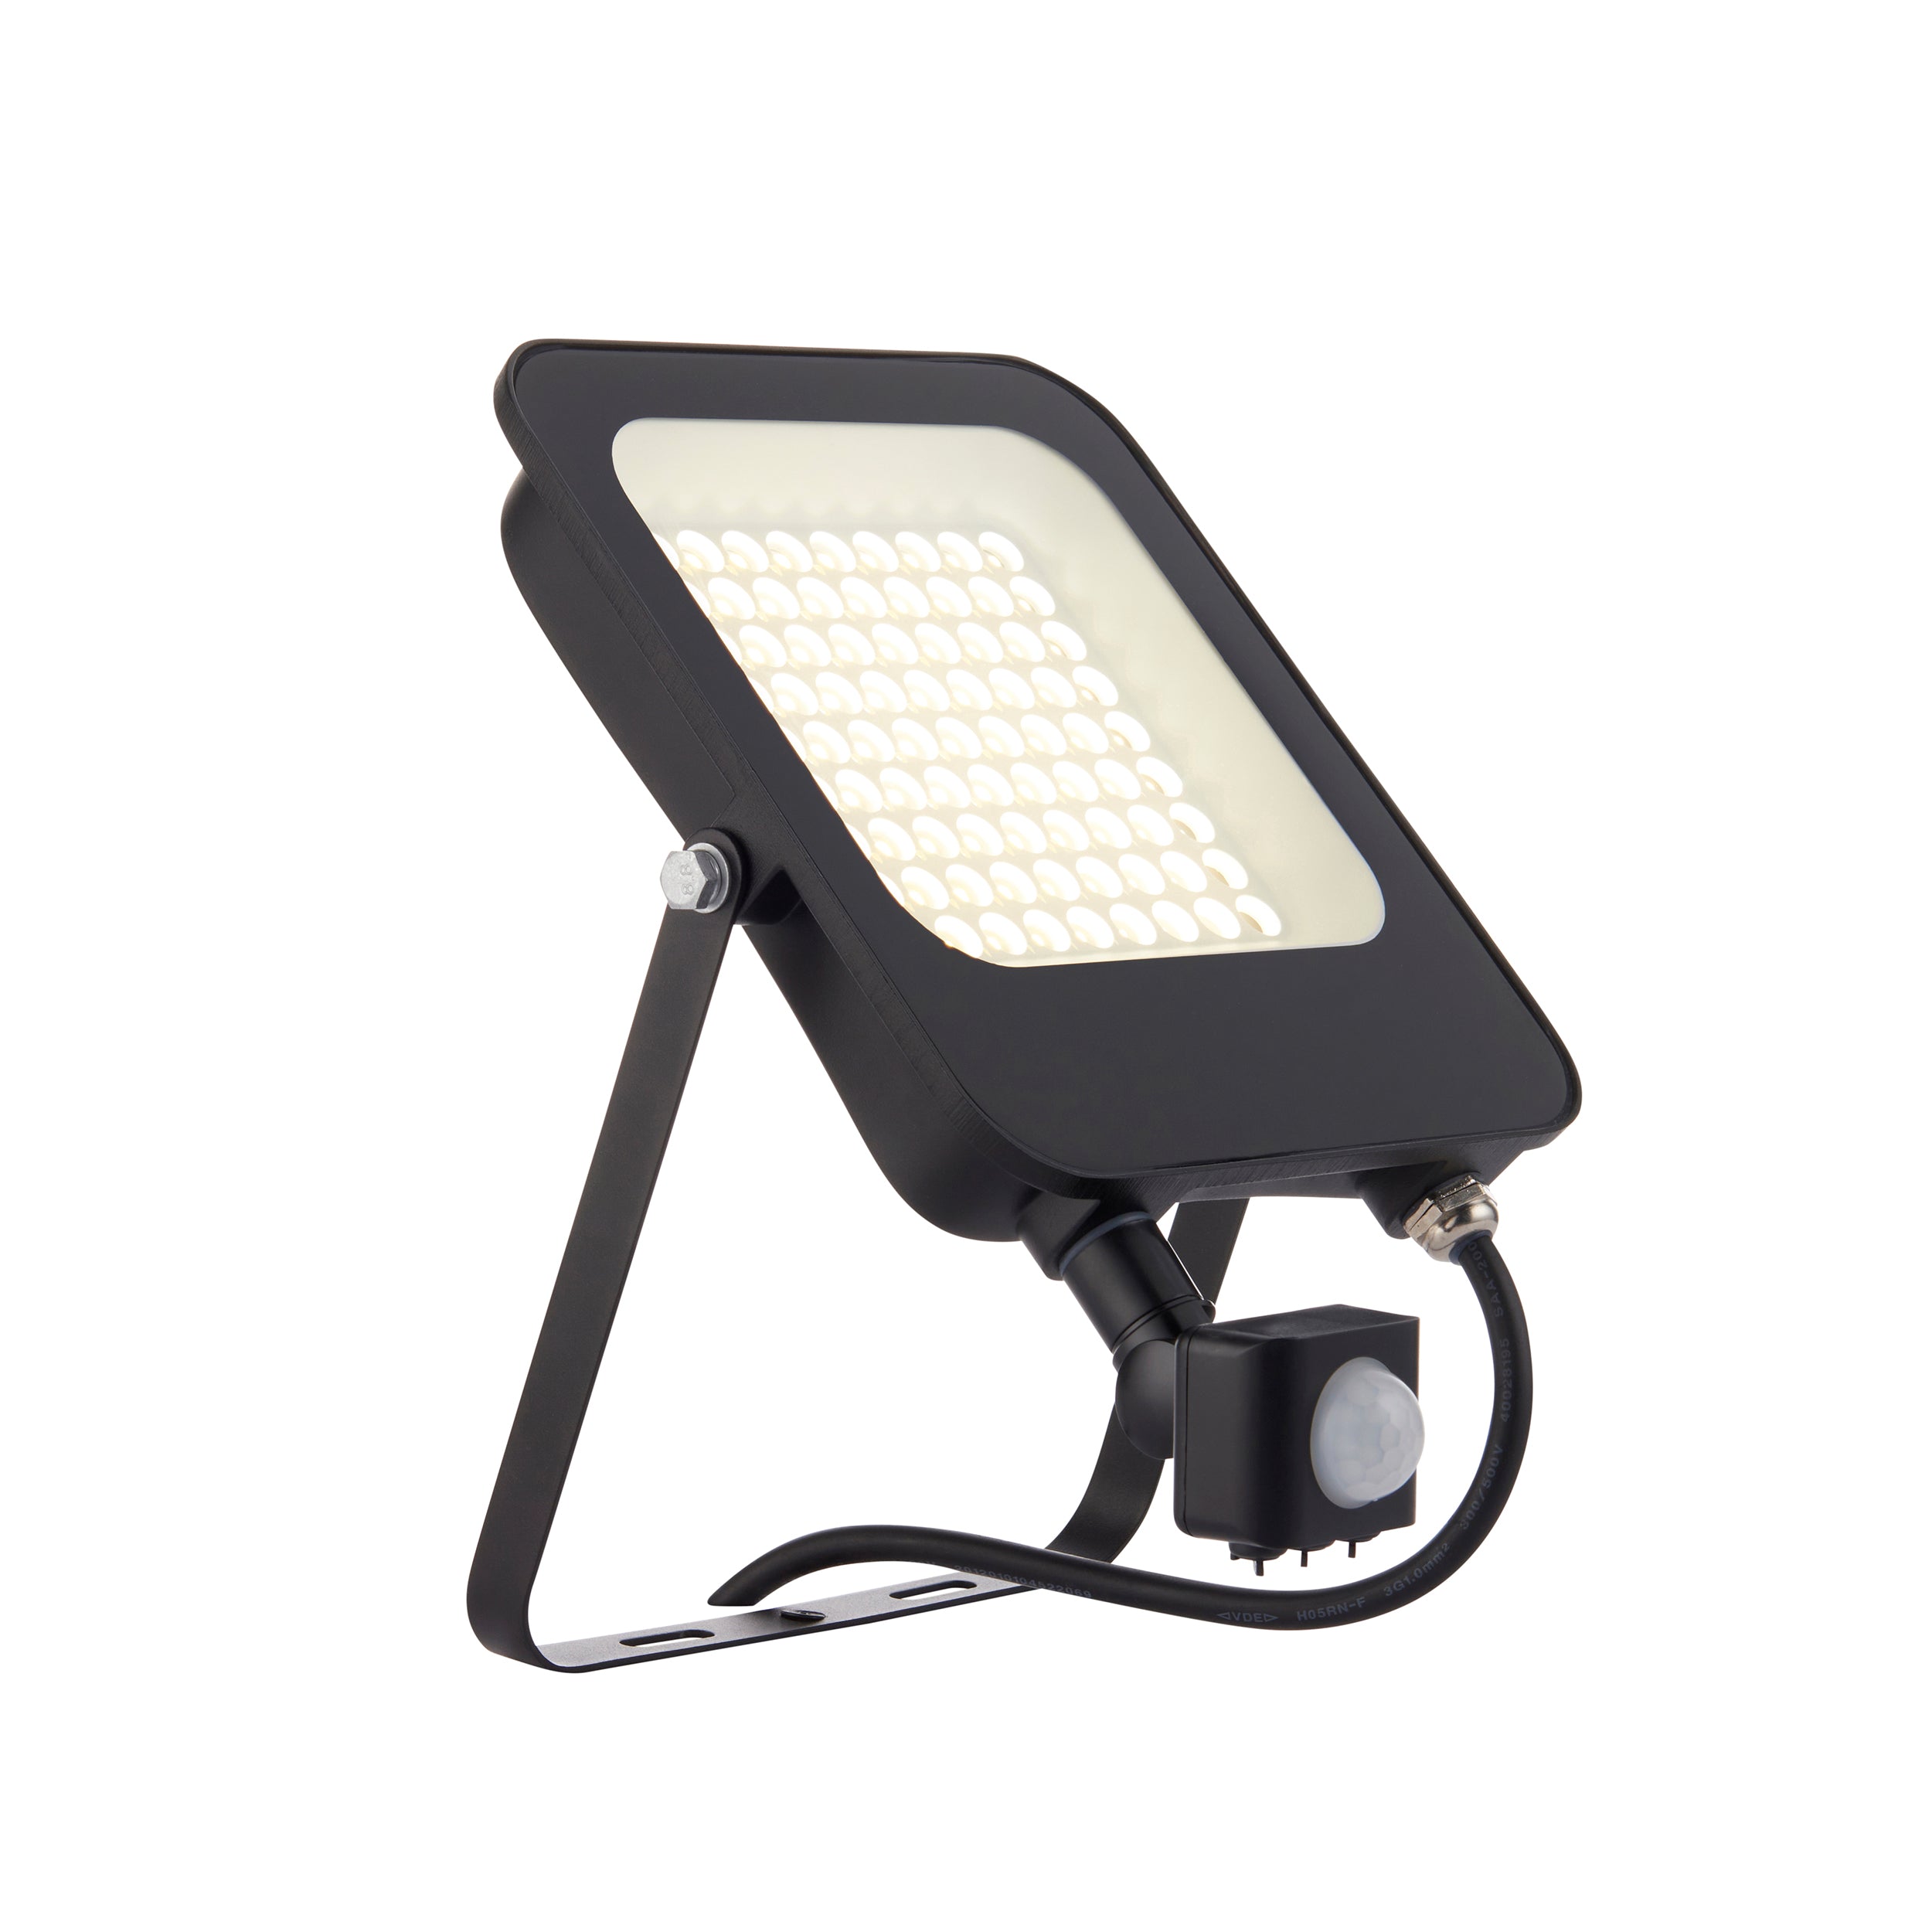 Guard 50W LED Floodlight with PIR (Manual Override) IP65